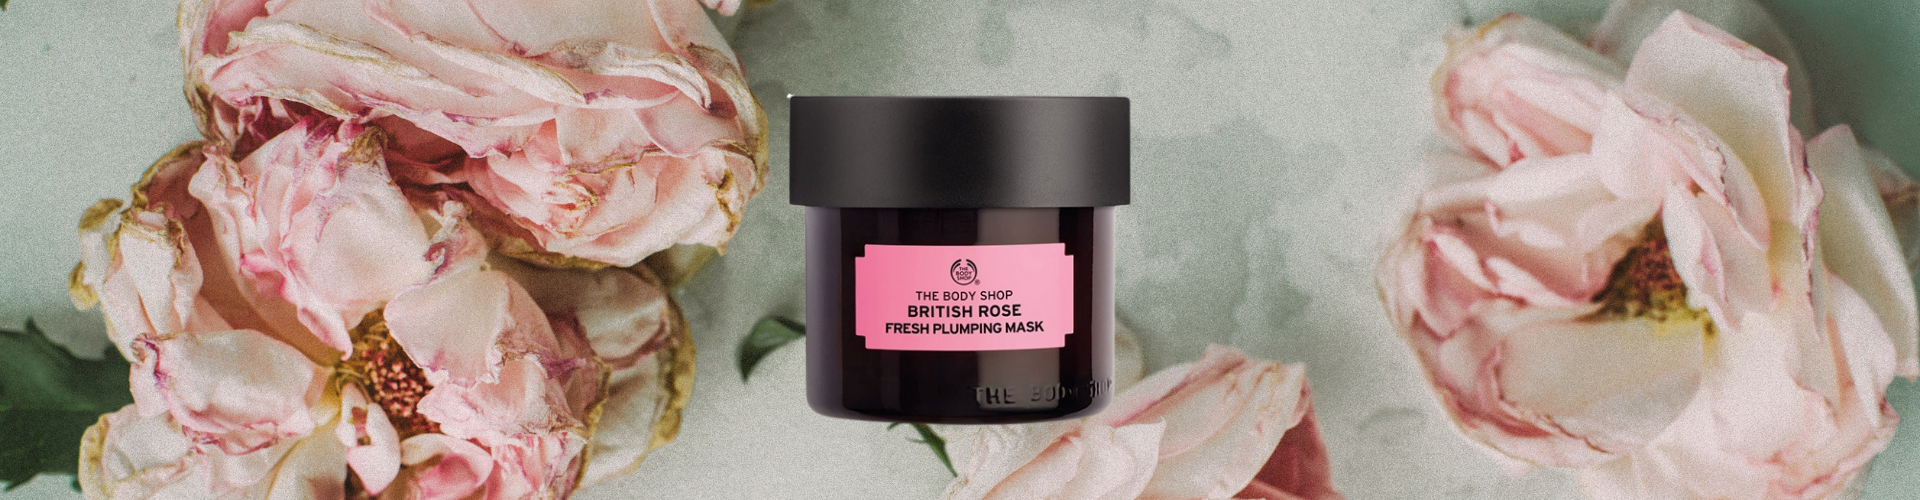 Photo of a jar of Body Shop British Rose Face Mask over a background of pink roses.